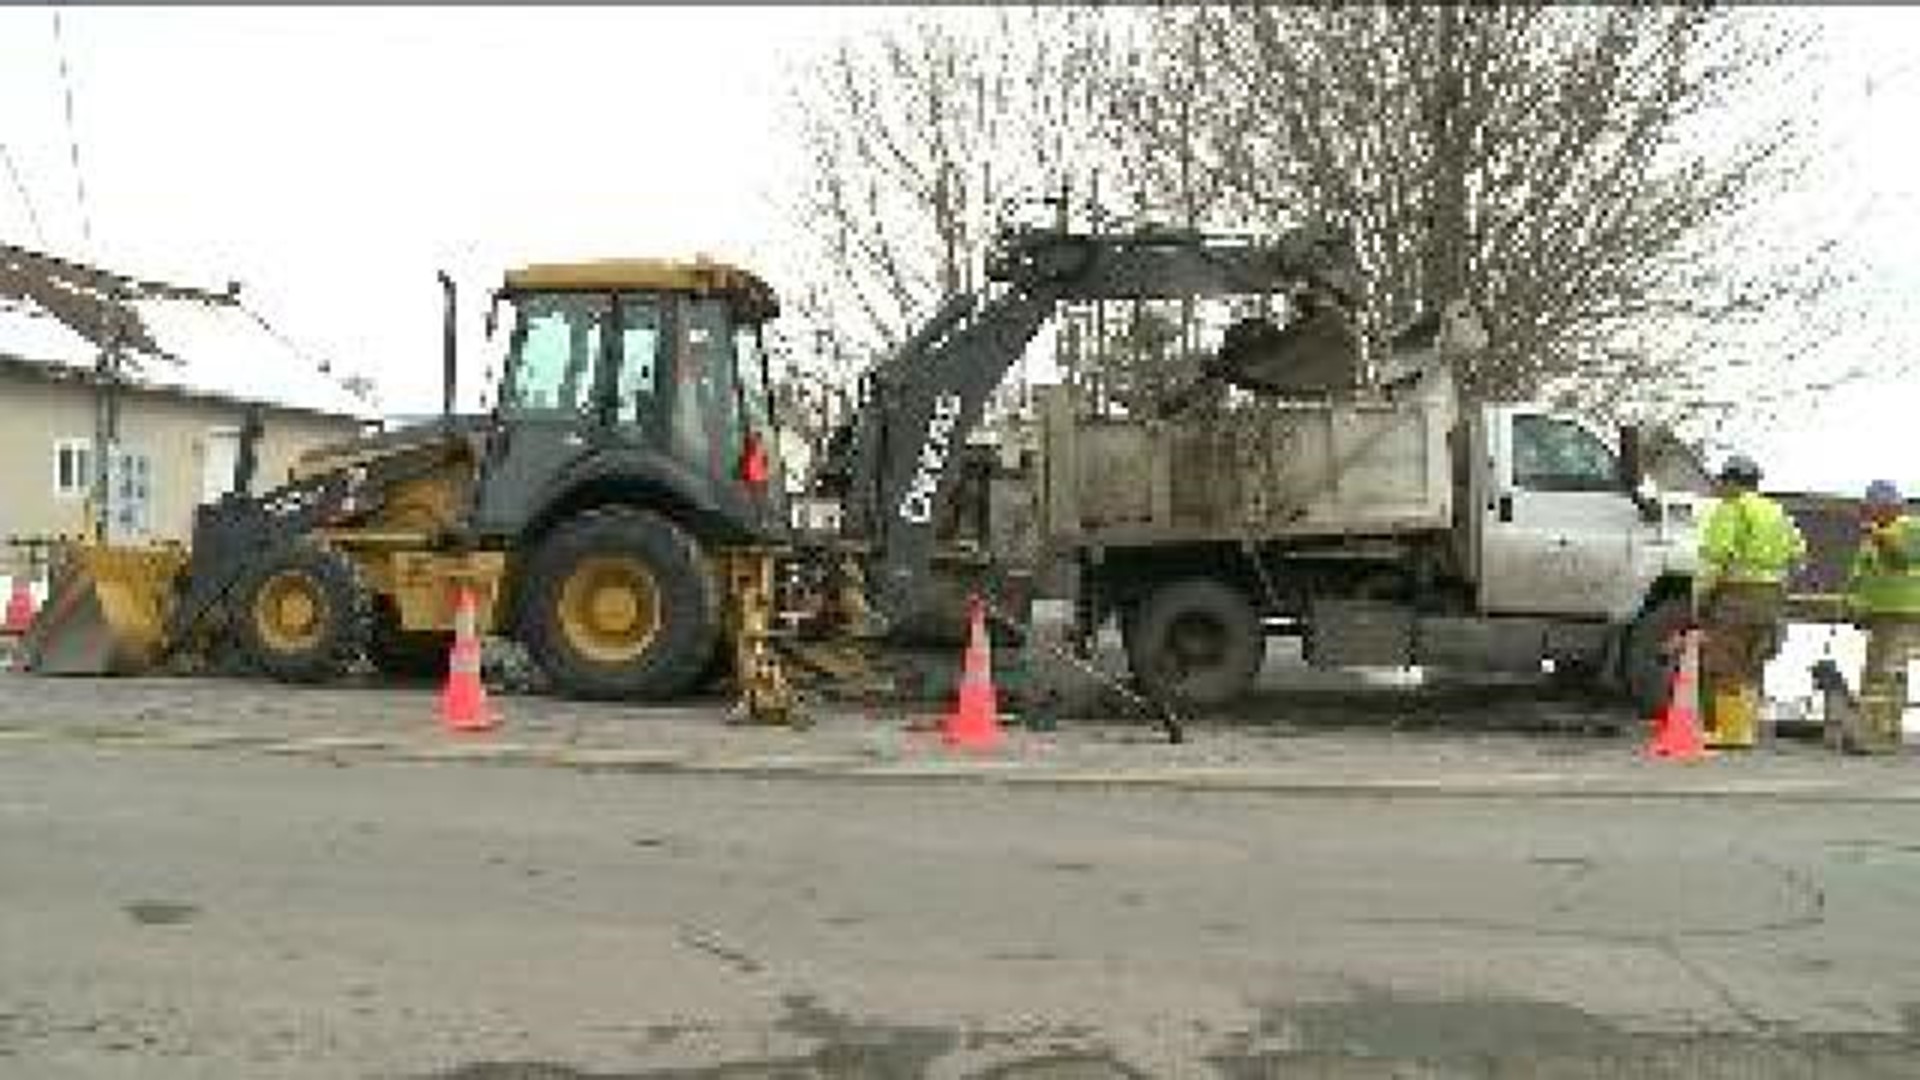 Cold Weather Causes Another Main Break in Scranton